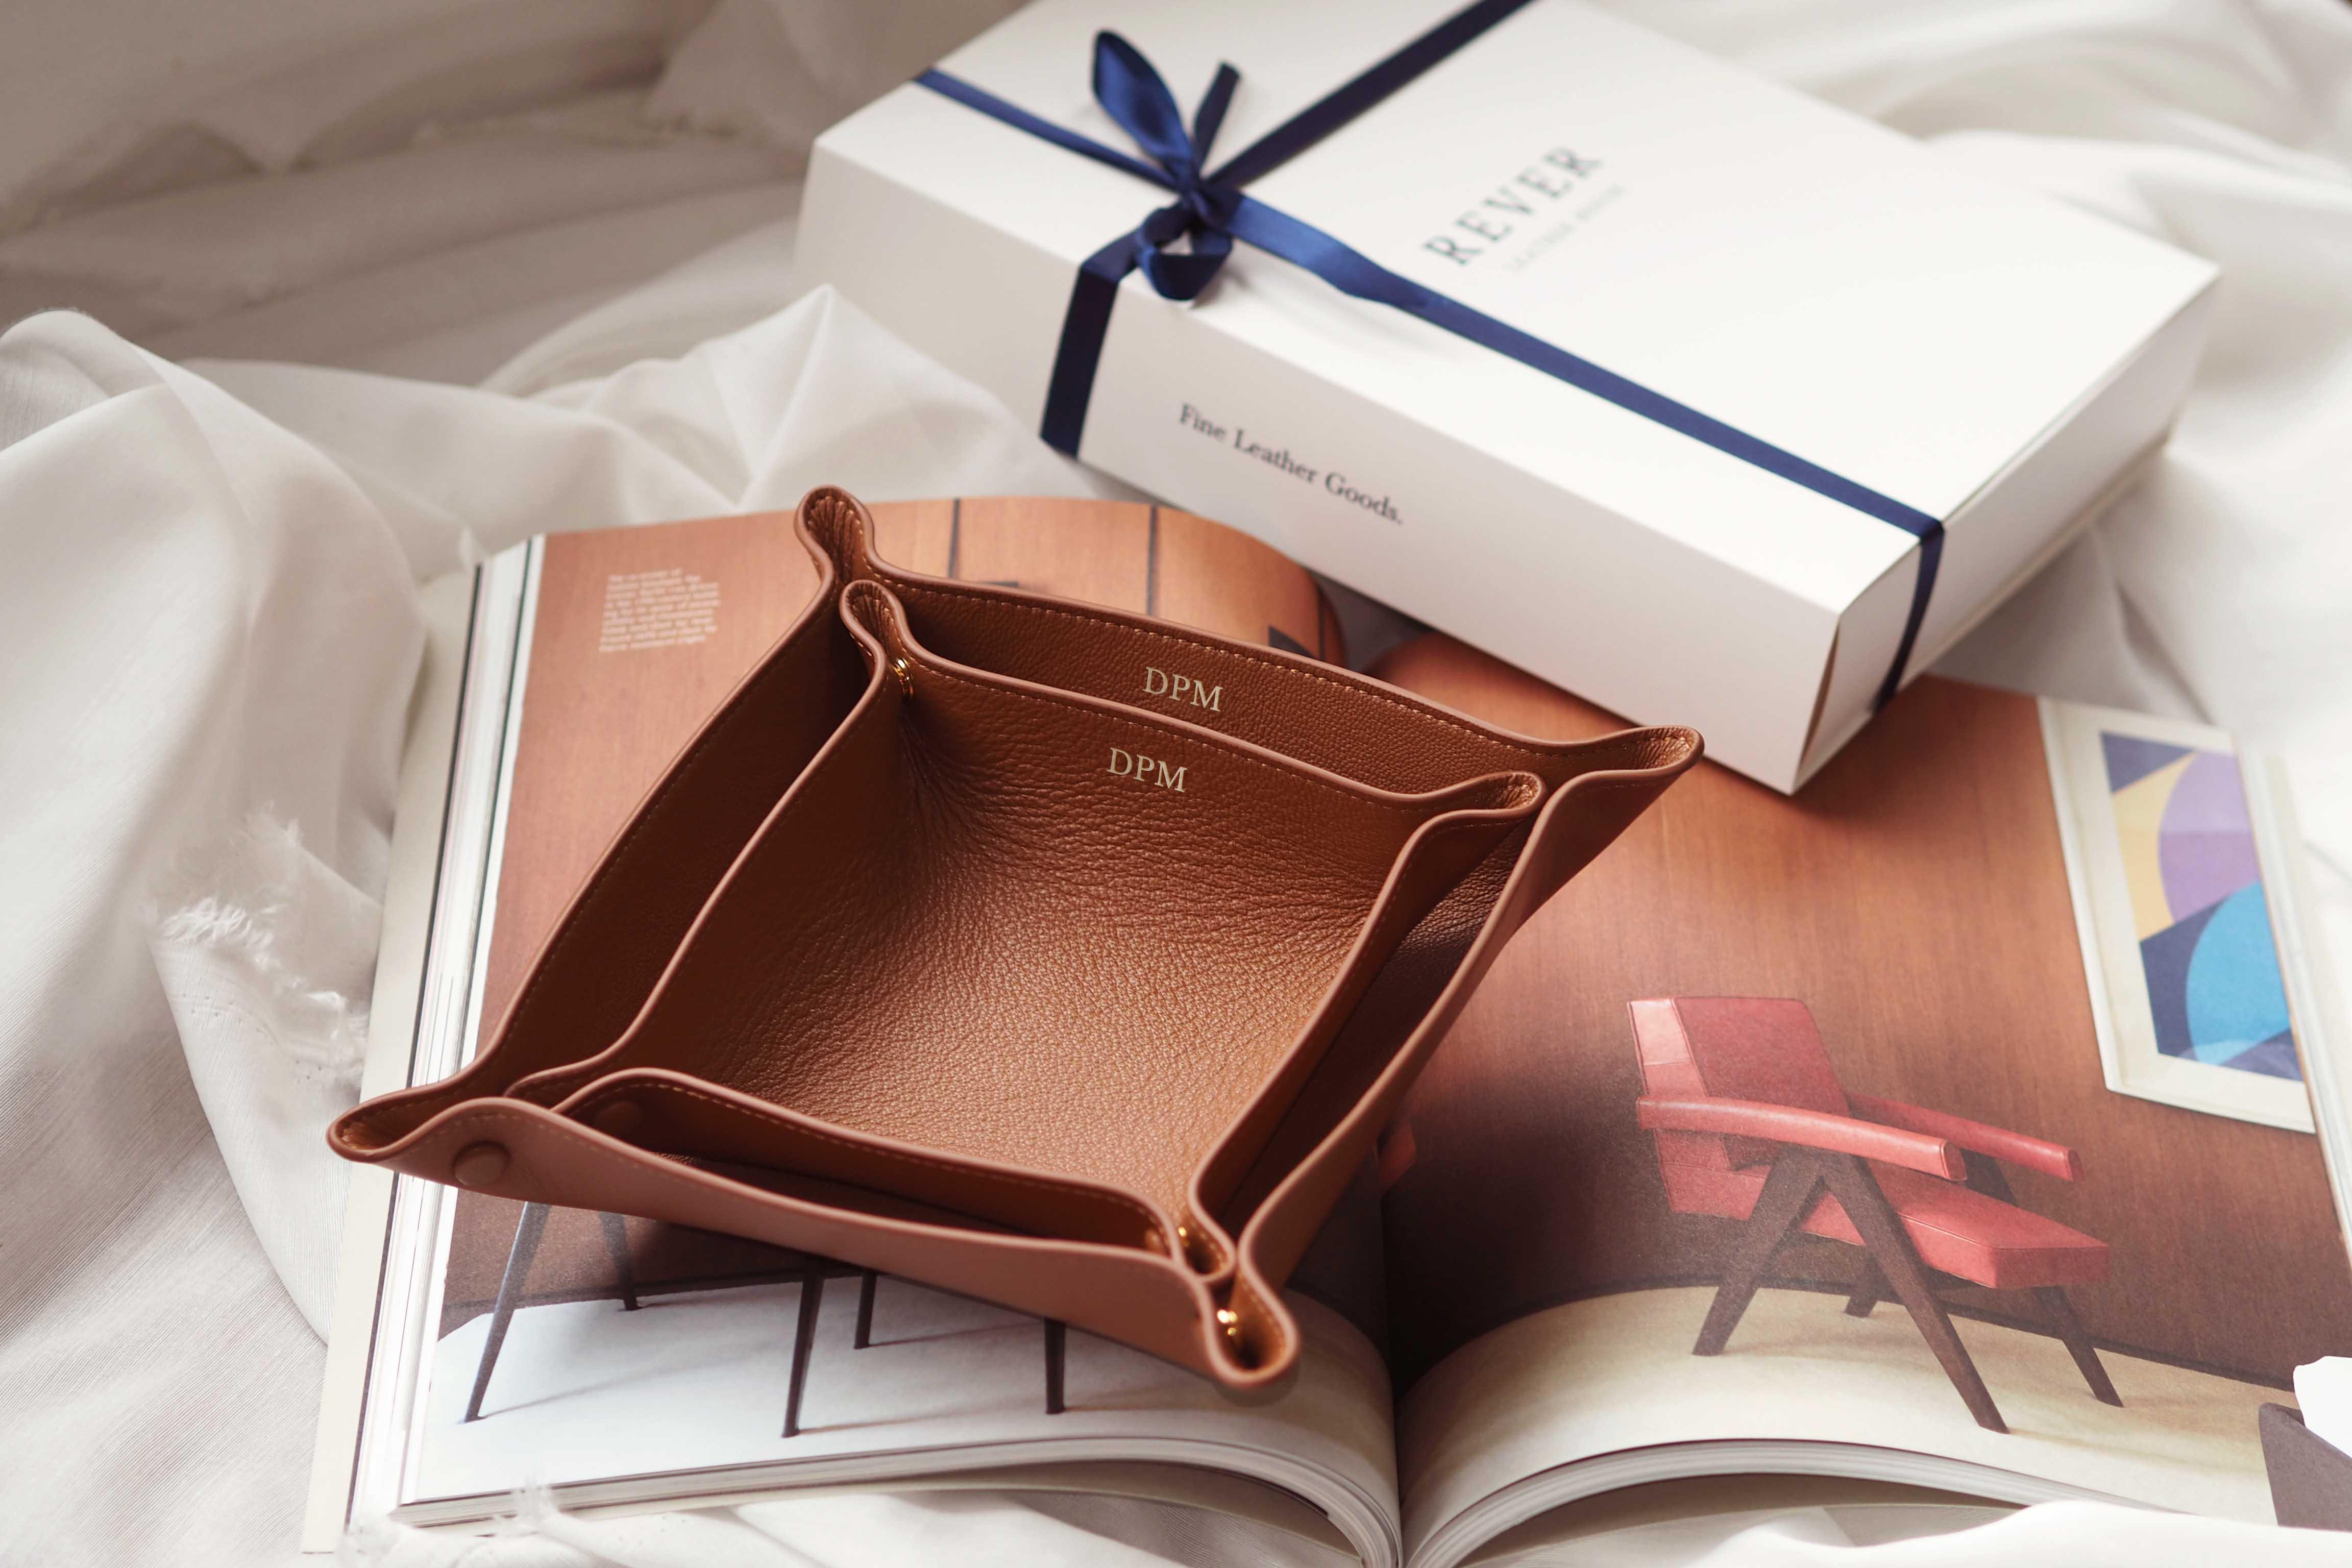 Our Community Picks: Elegant office gifts for colleagues - Rever Leather Goods